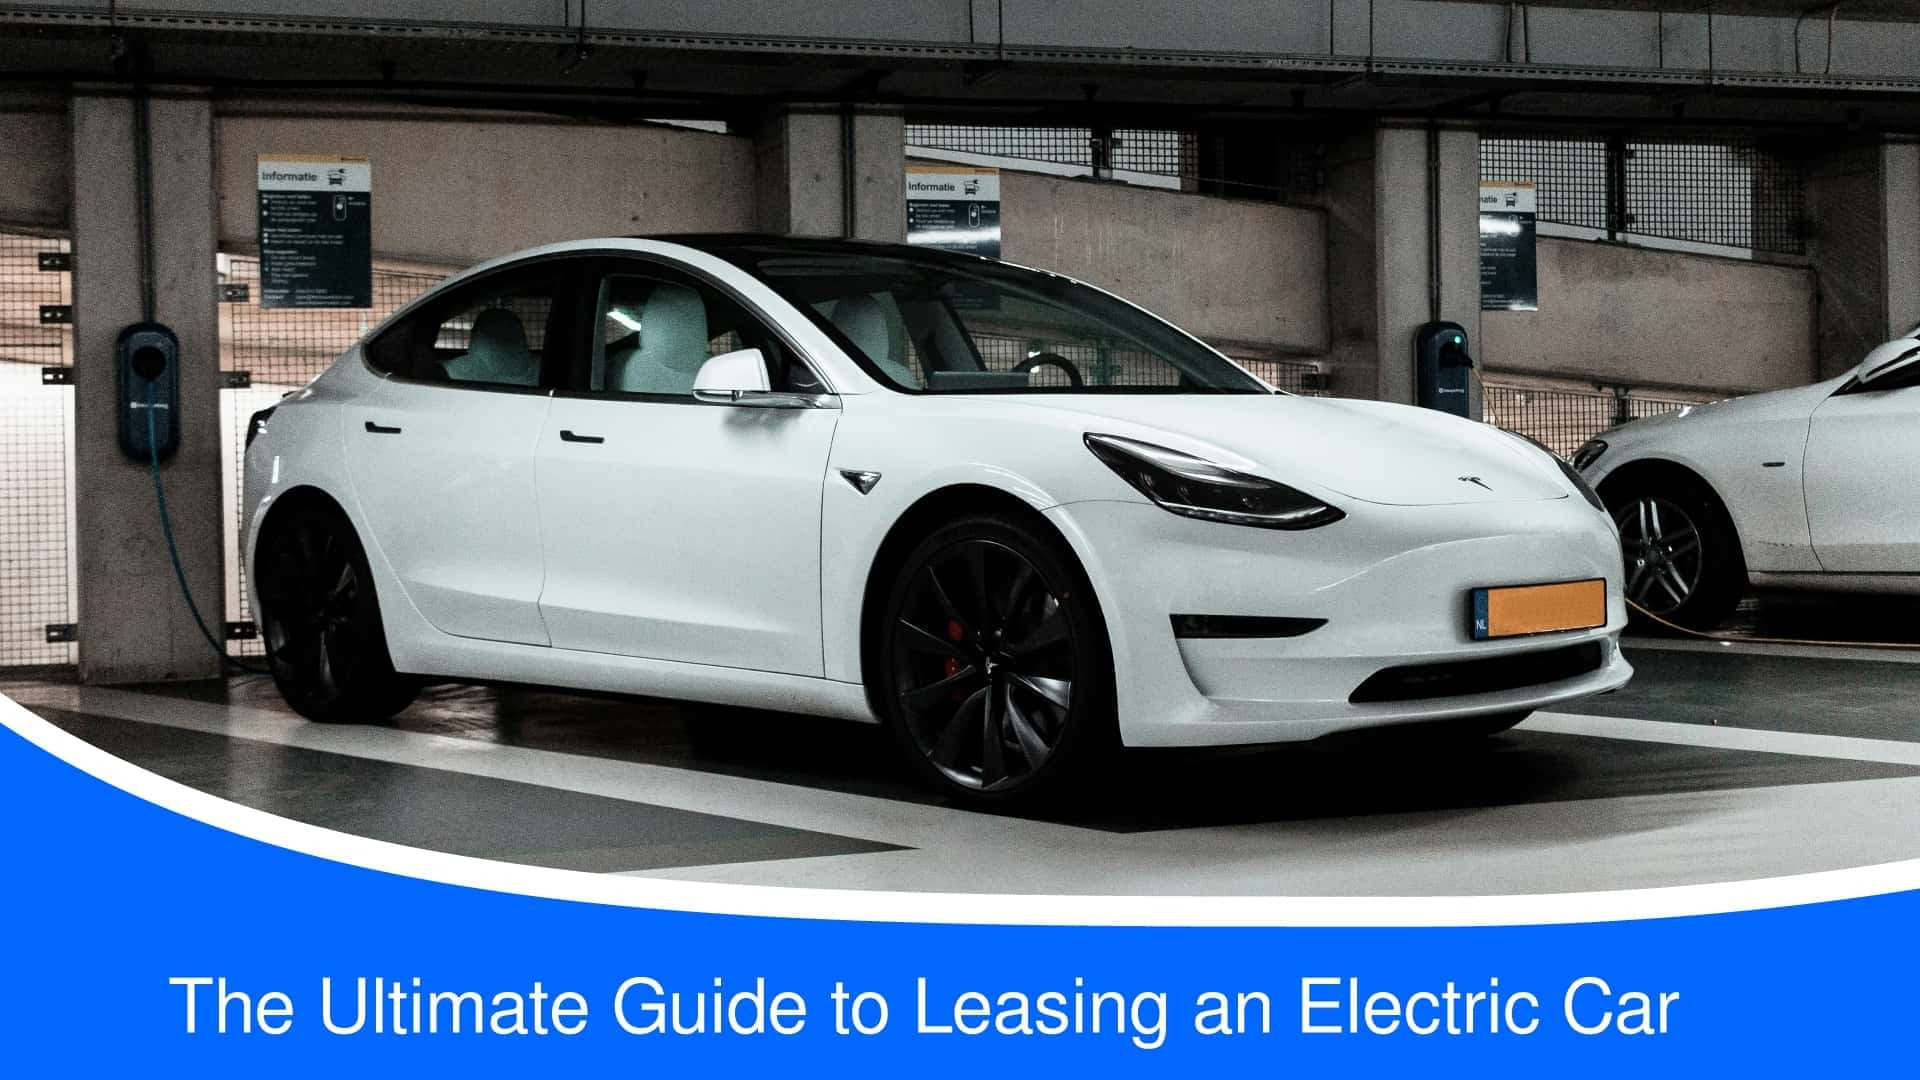 The Ultimate Guide to Leasing an Electric Car